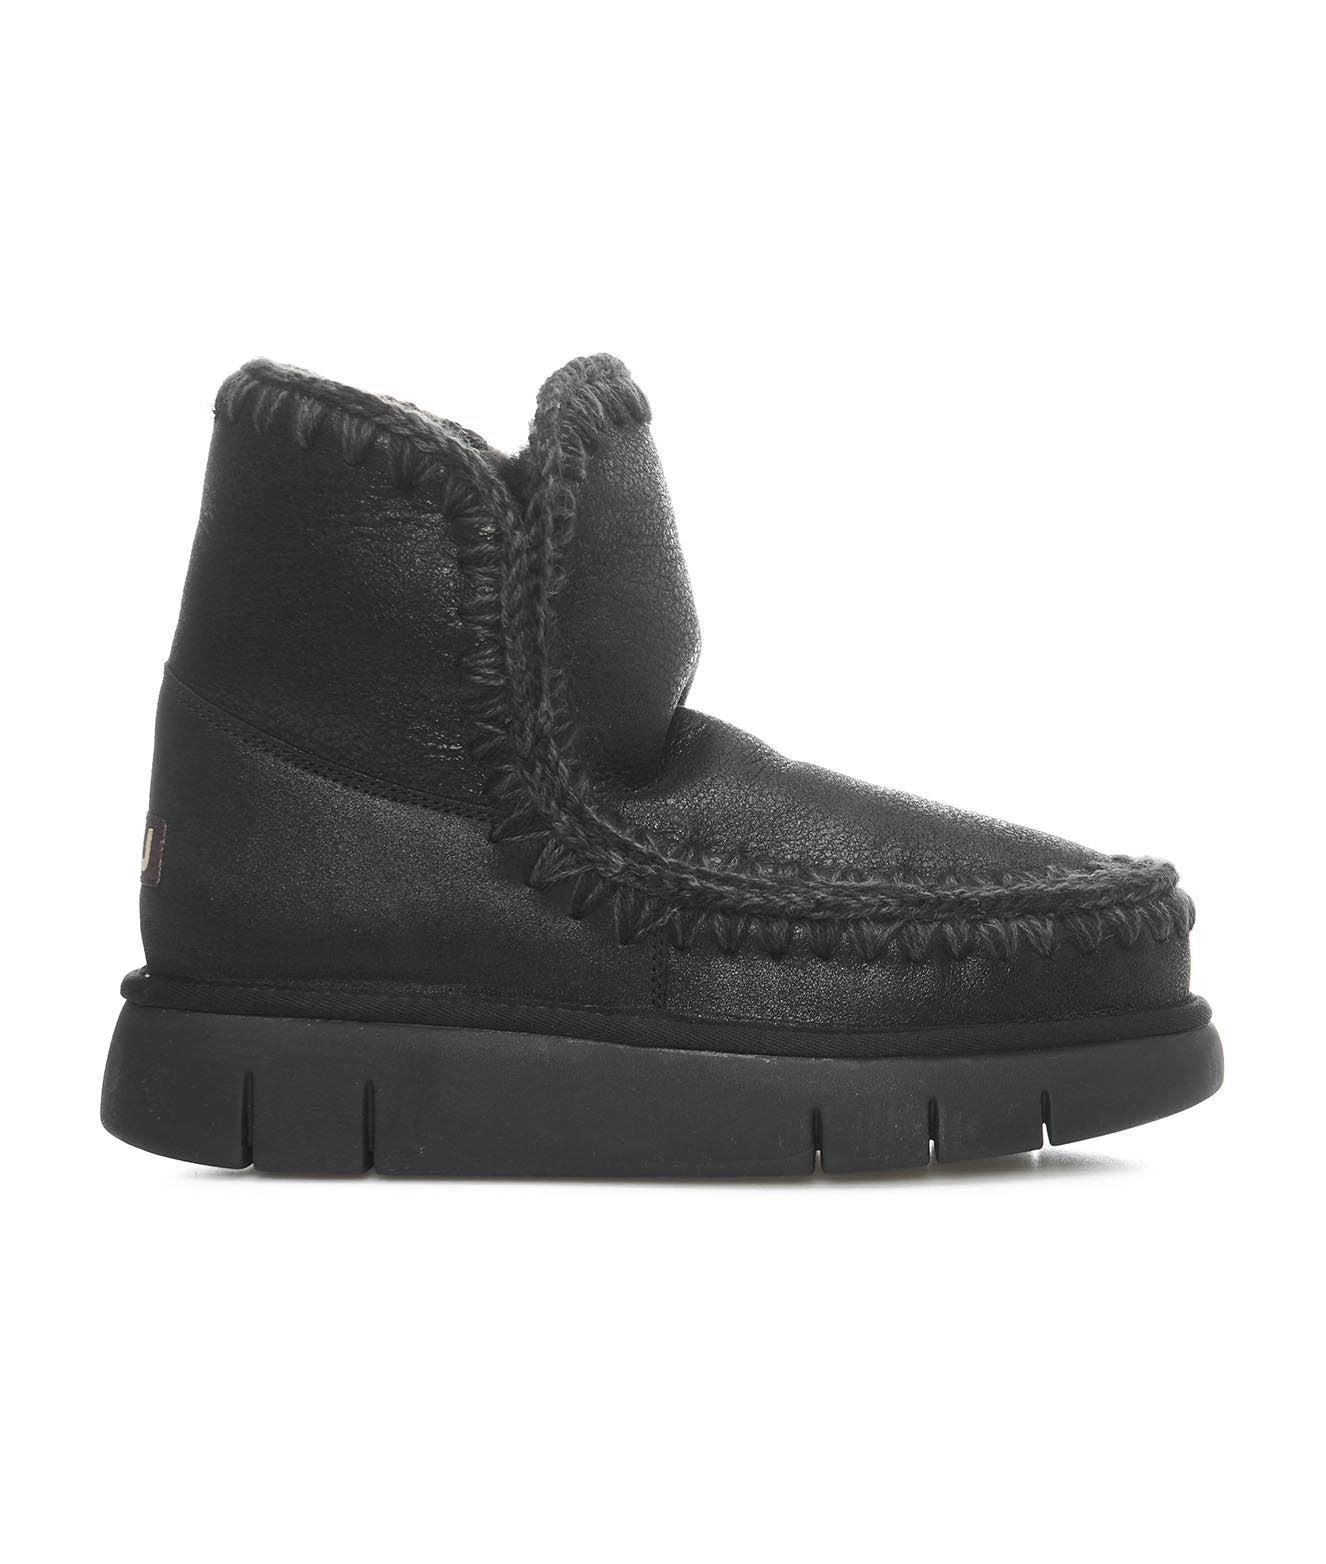 Mou Boots in Black | Lyst